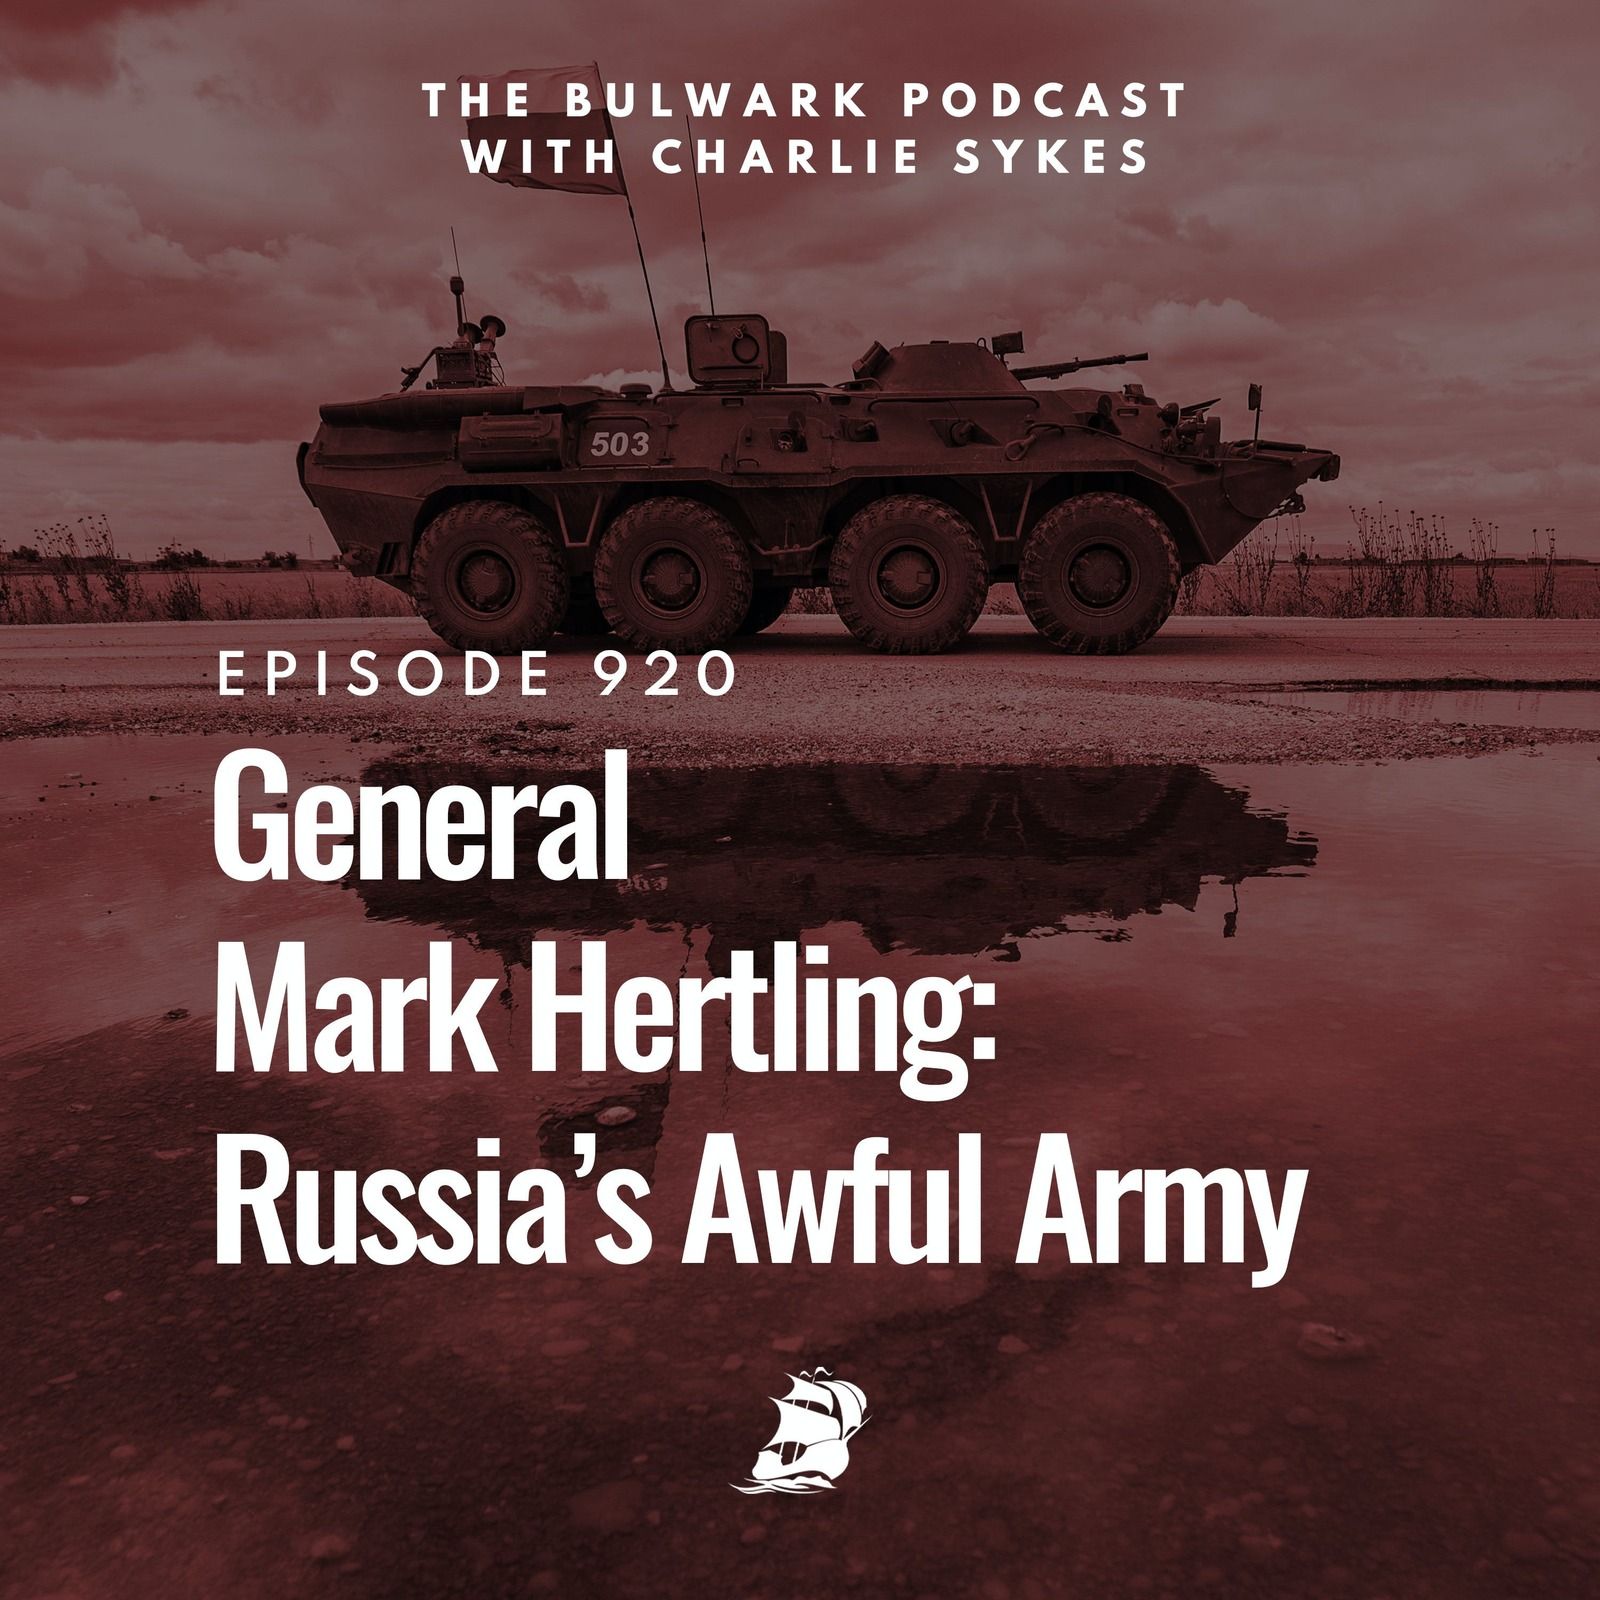 General Mark Hertling: Russia’s Awful Army